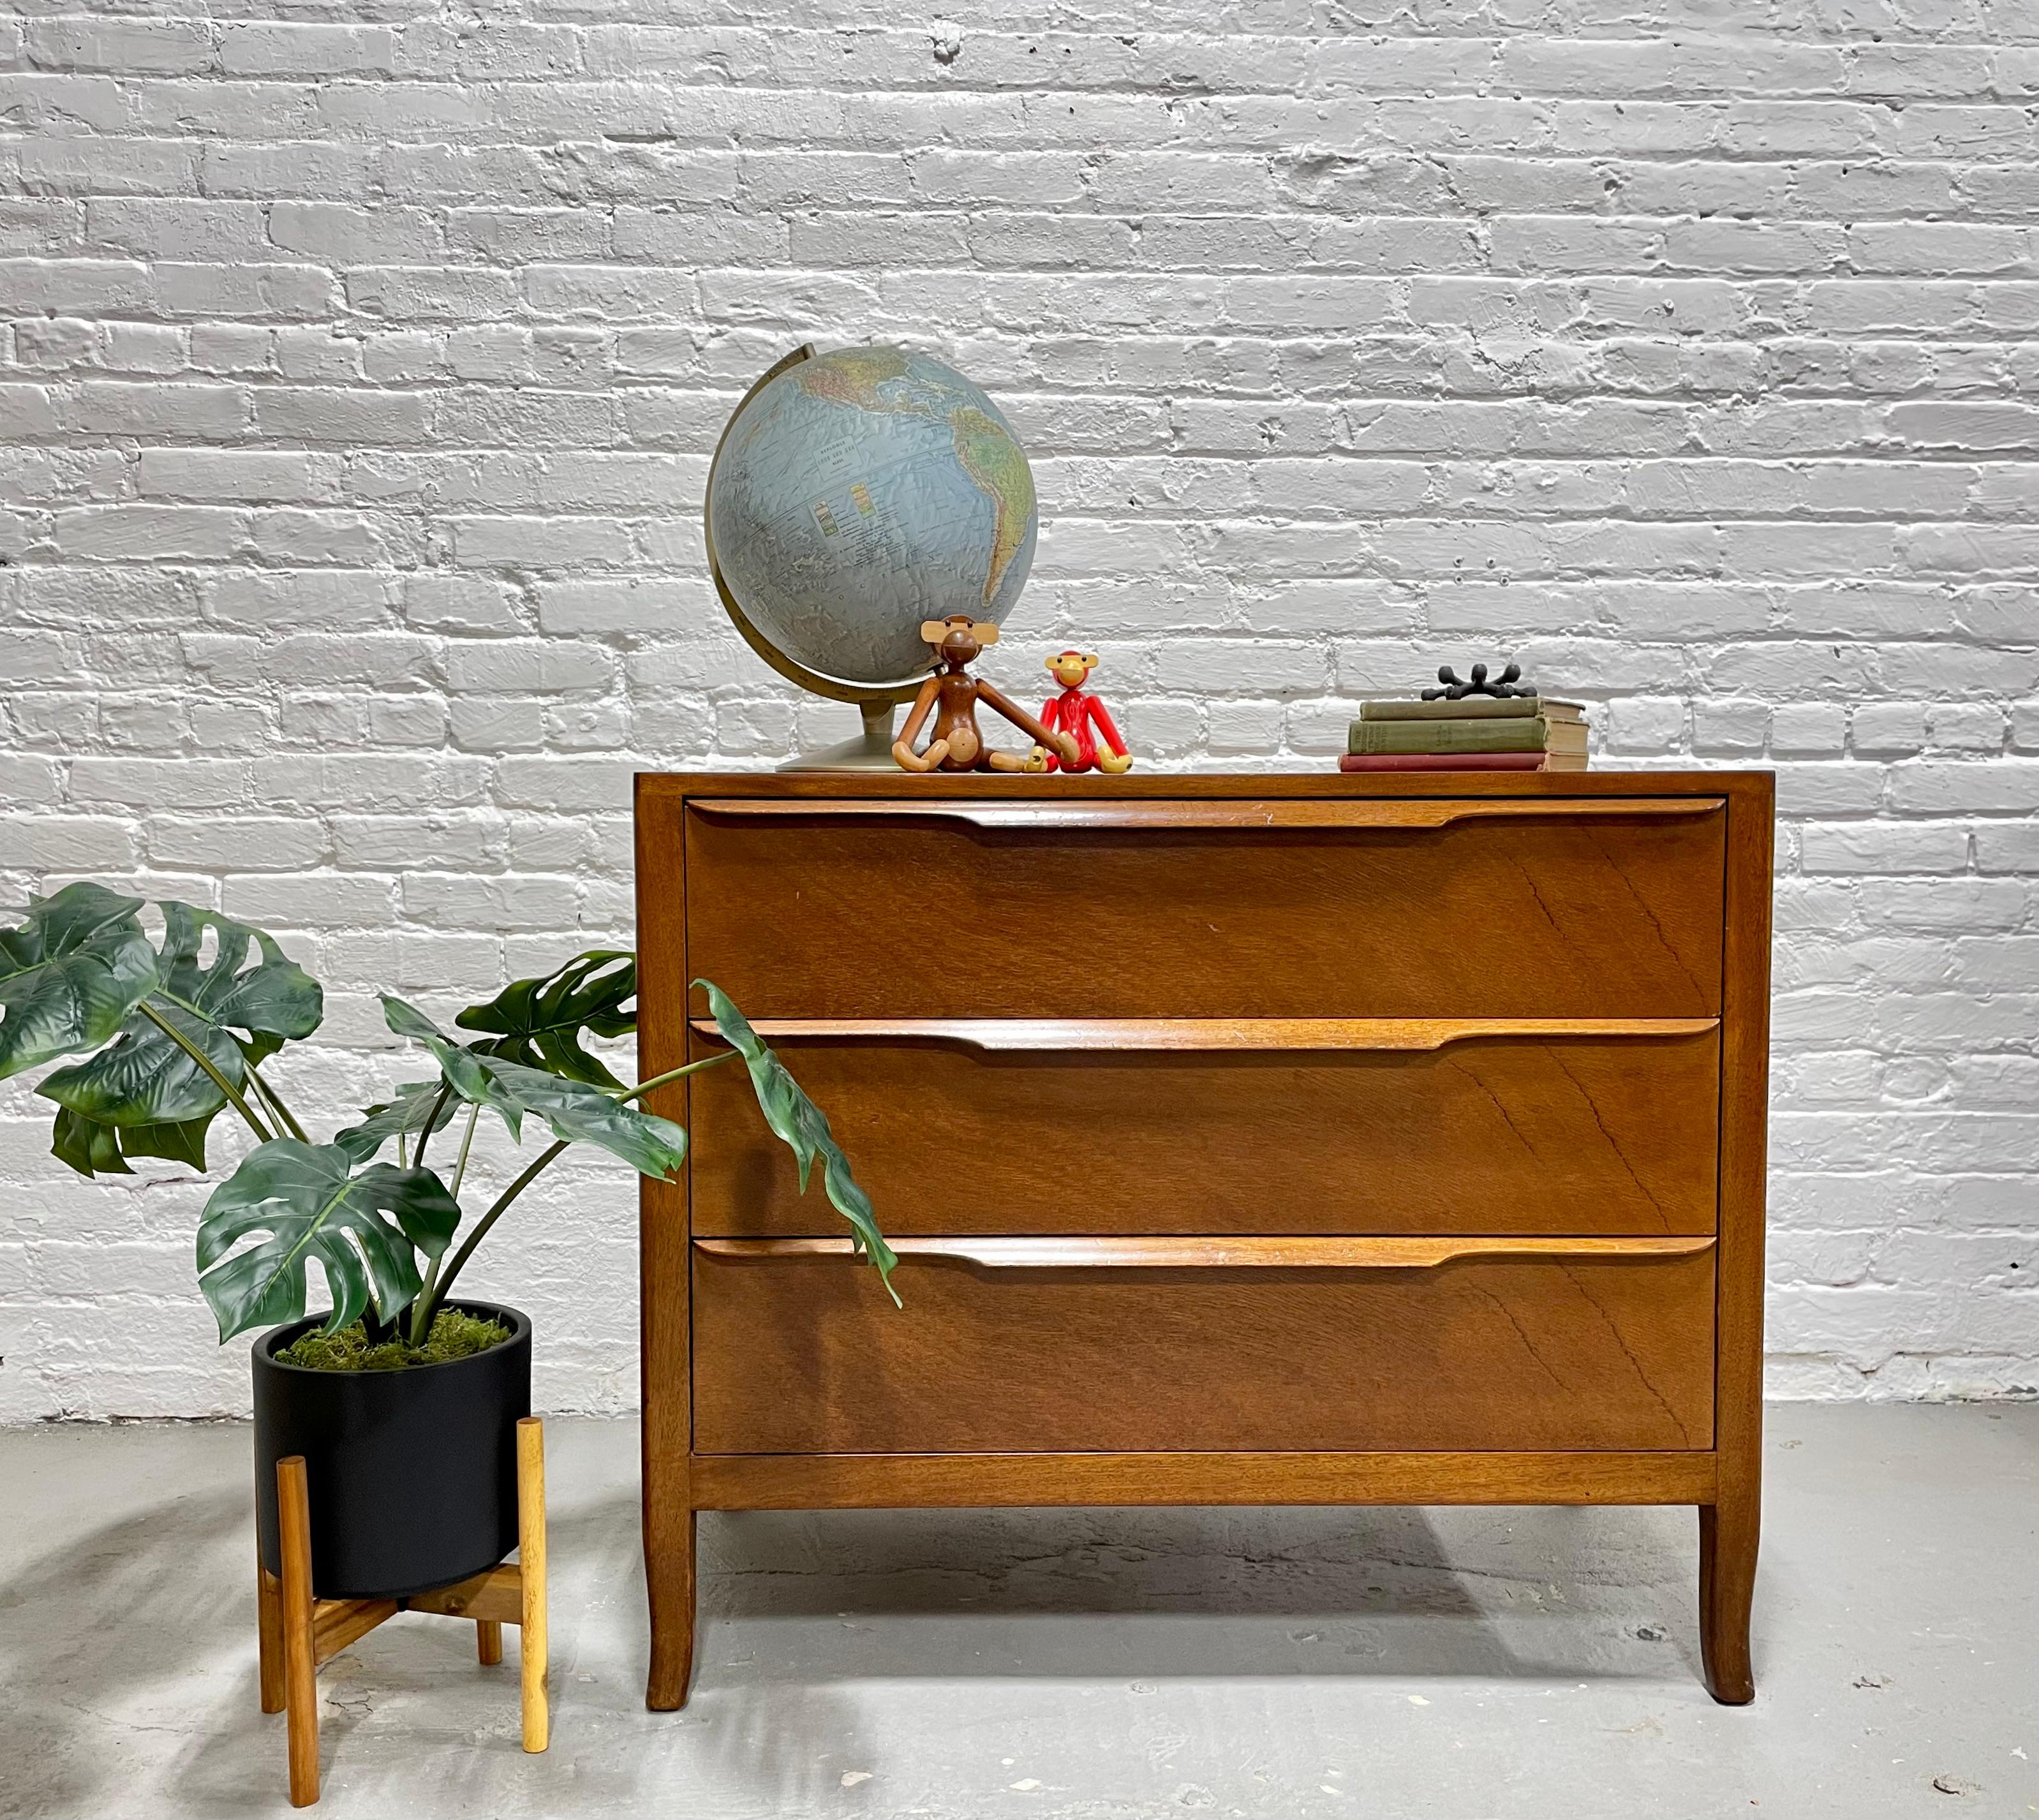 Mid-Century Modern Sculpted Drawer Walnut dresser by Sligh Furniture Company. The structure and quality of this piece highlight the elegant Mid Century style construction. The three deep and spacious drawers are perfect for clothing storage or as an